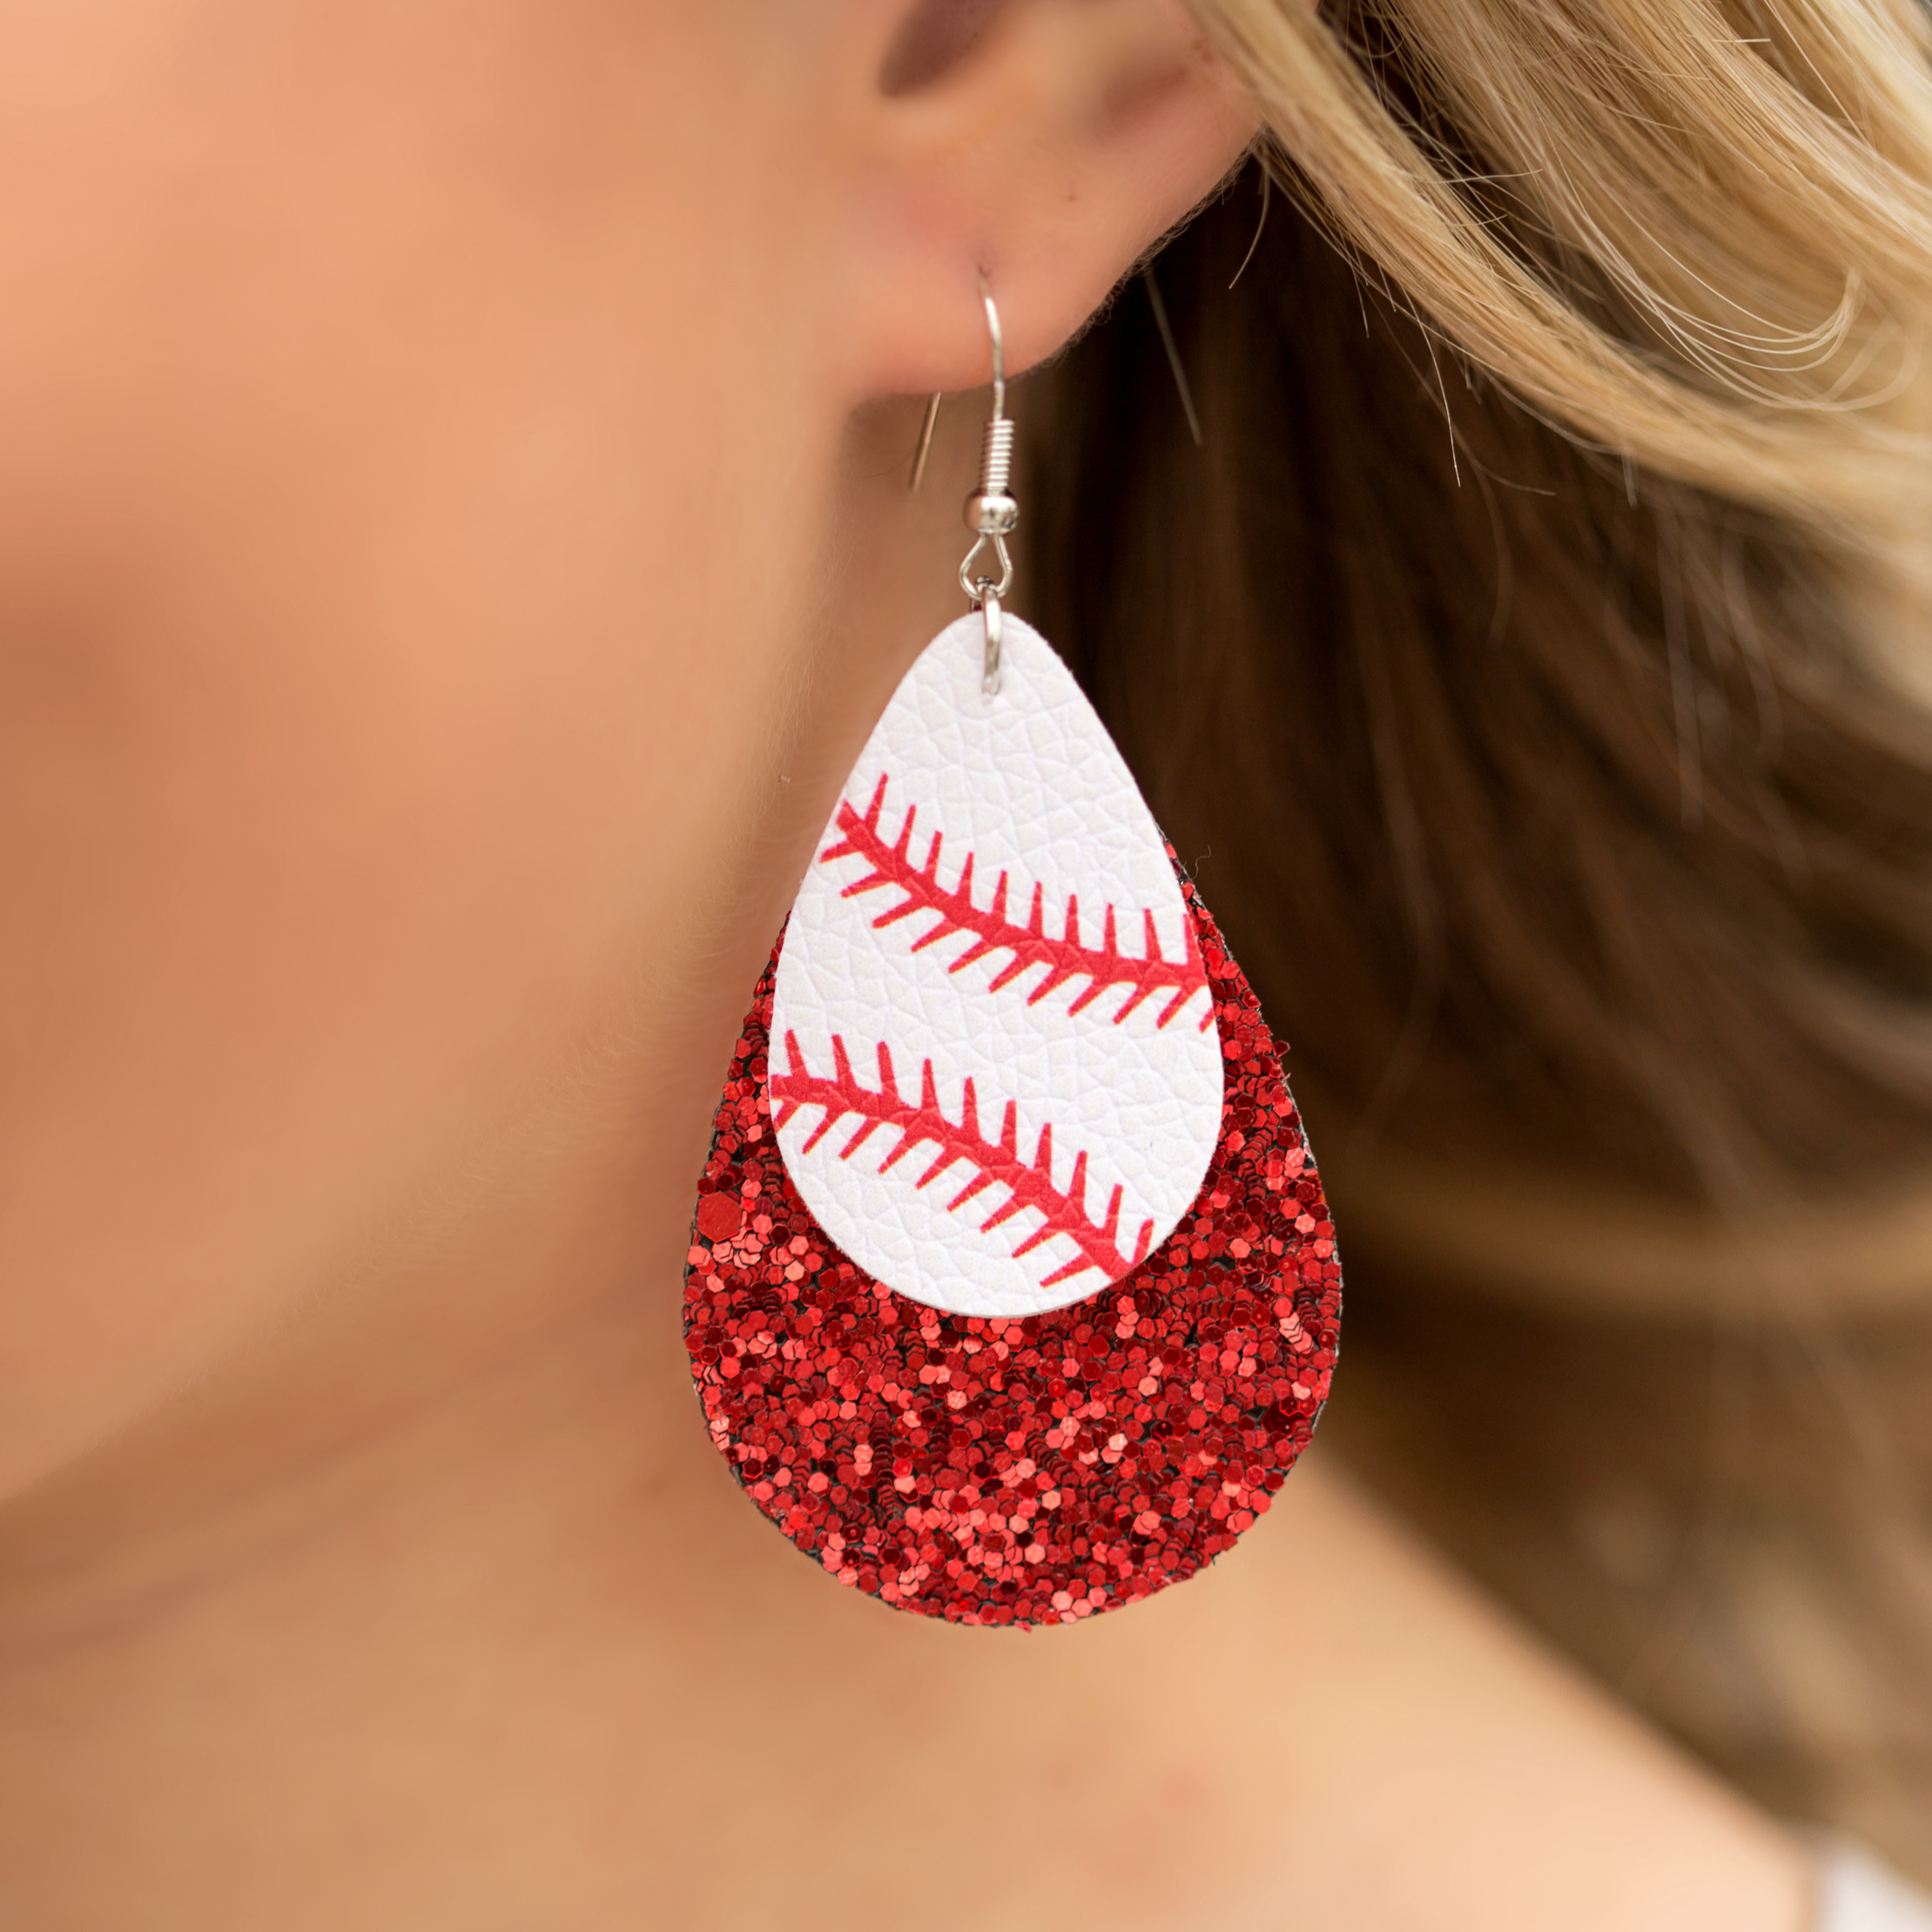 St. Louis Cardinals Inspired Earrings 